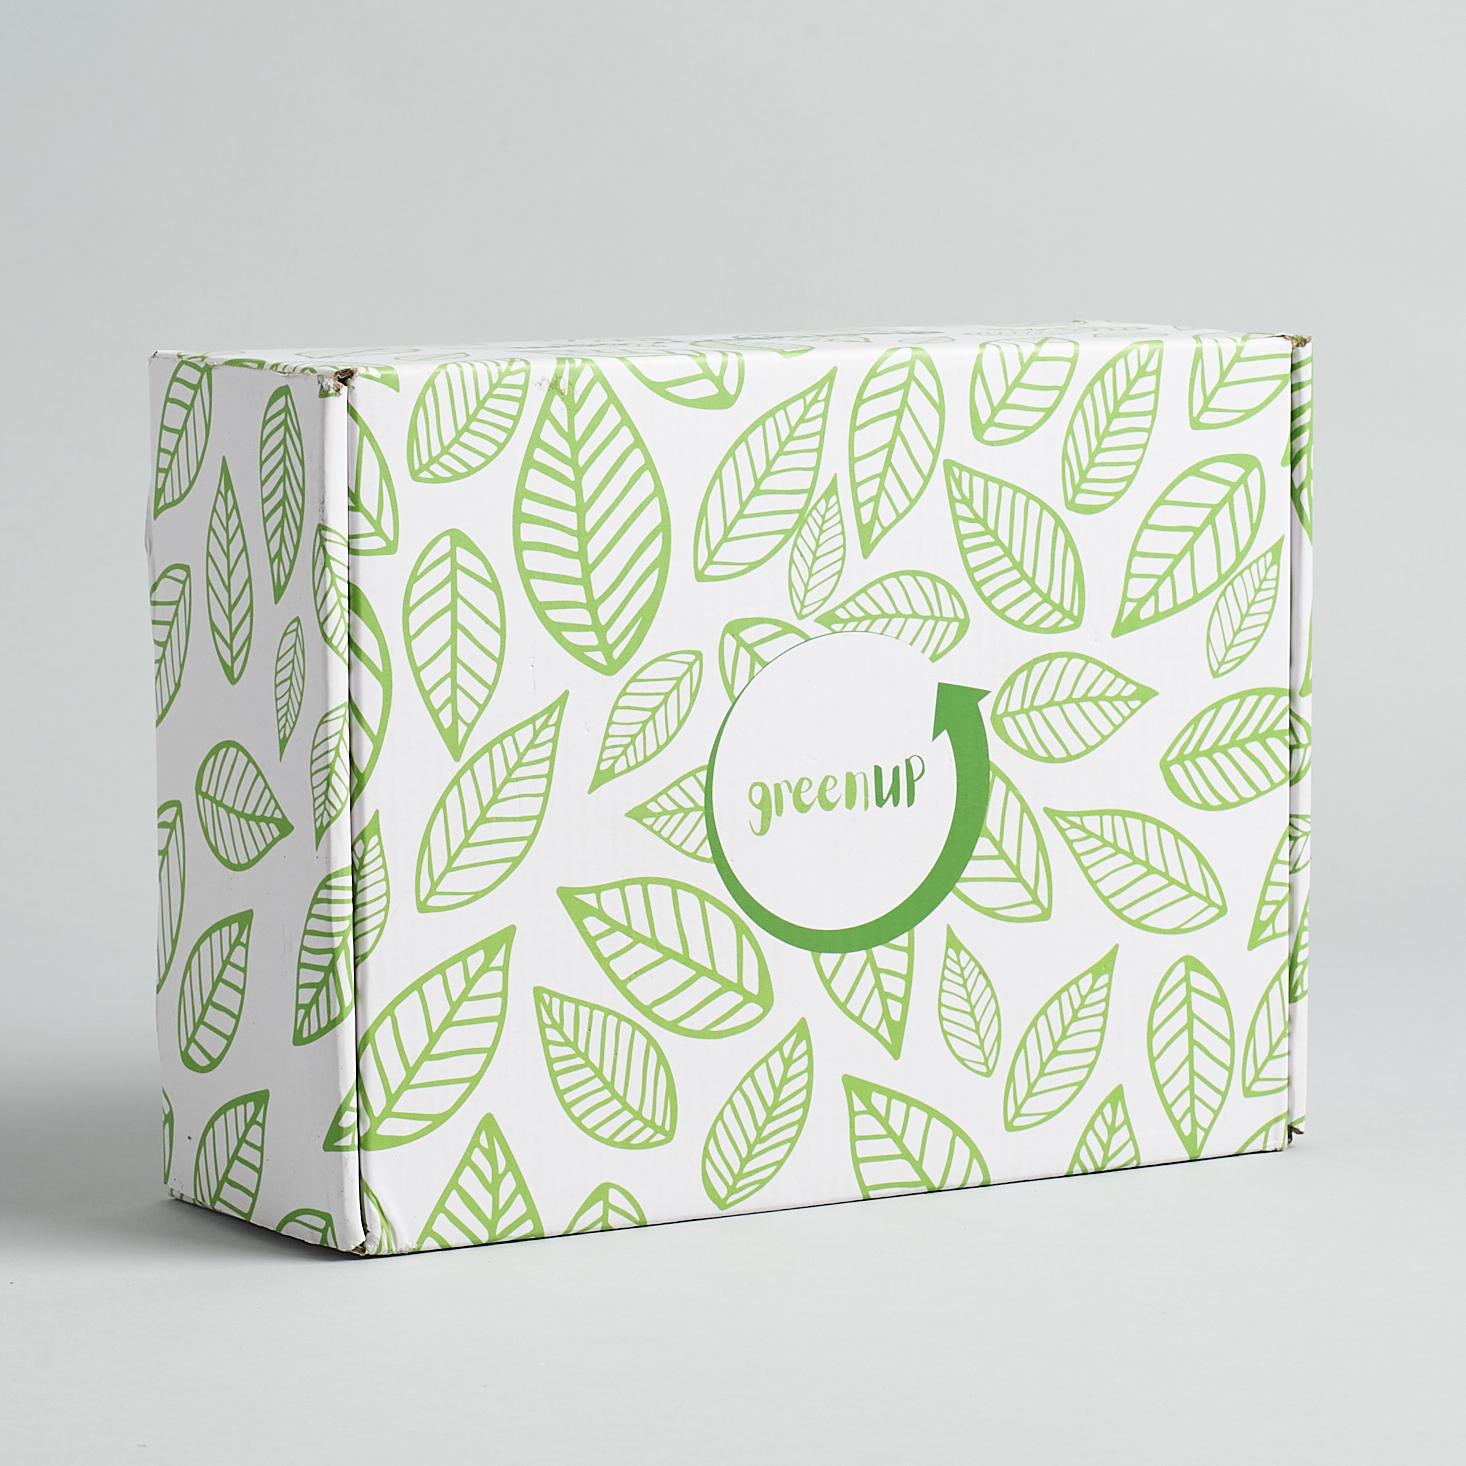 greenUP Box Subscription Review – August 2020